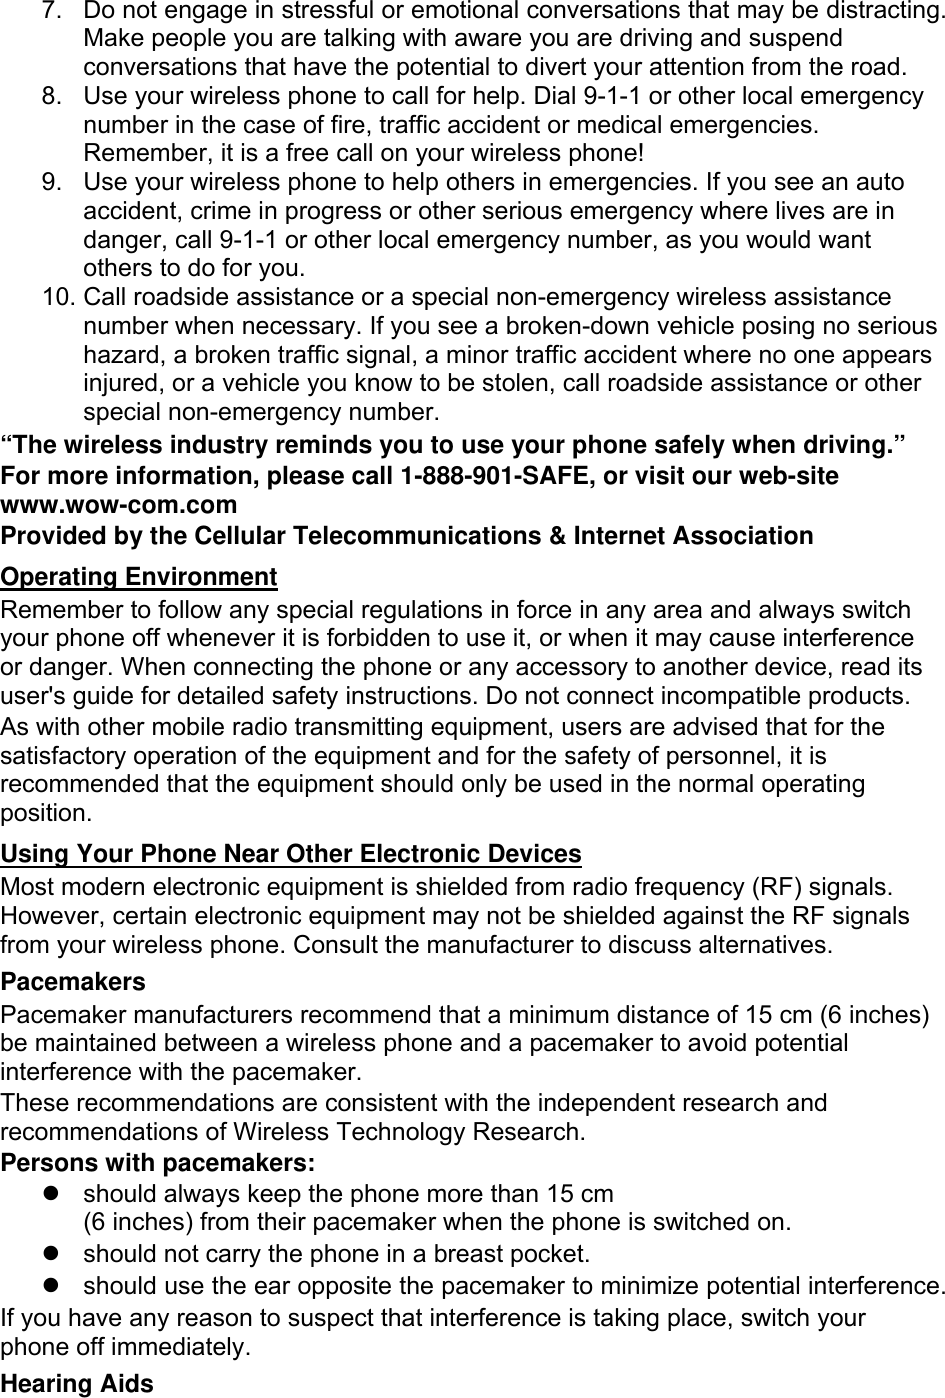 7.  Do not engage in stressful or emotional conversations that may be distracting. Make people you are talking with aware you are driving and suspend conversations that have the potential to divert your attention from the road. 8.  Use your wireless phone to call for help. Dial 9-1-1 or other local emergency number in the case of fire, traffic accident or medical emergencies. Remember, it is a free call on your wireless phone! 9.  Use your wireless phone to help others in emergencies. If you see an auto accident, crime in progress or other serious emergency where lives are in danger, call 9-1-1 or other local emergency number, as you would want others to do for you. 10. Call roadside assistance or a special non-emergency wireless assistance number when necessary. If you see a broken-down vehicle posing no serious hazard, a broken traffic signal, a minor traffic accident where no one appears injured, or a vehicle you know to be stolen, call roadside assistance or other special non-emergency number. “The wireless industry reminds you to use your phone safely when driving.” For more information, please call 1-888-901-SAFE, or visit our web-site www.wow-com.com Provided by the Cellular Telecommunications &amp; Internet Association Operating Environment Remember to follow any special regulations in force in any area and always switch your phone off whenever it is forbidden to use it, or when it may cause interference or danger. When connecting the phone or any accessory to another device, read its user&apos;s guide for detailed safety instructions. Do not connect incompatible products. As with other mobile radio transmitting equipment, users are advised that for the satisfactory operation of the equipment and for the safety of personnel, it is recommended that the equipment should only be used in the normal operating position. Using Your Phone Near Other Electronic Devices Most modern electronic equipment is shielded from radio frequency (RF) signals. However, certain electronic equipment may not be shielded against the RF signals from your wireless phone. Consult the manufacturer to discuss alternatives. Pacemakers Pacemaker manufacturers recommend that a minimum distance of 15 cm (6 inches) be maintained between a wireless phone and a pacemaker to avoid potential interference with the pacemaker. These recommendations are consistent with the independent research and recommendations of Wireless Technology Research. Persons with pacemakers: z  should always keep the phone more than 15 cm   (6 inches) from their pacemaker when the phone is switched on. z  should not carry the phone in a breast pocket. z  should use the ear opposite the pacemaker to minimize potential interference. If you have any reason to suspect that interference is taking place, switch your phone off immediately. Hearing Aids 